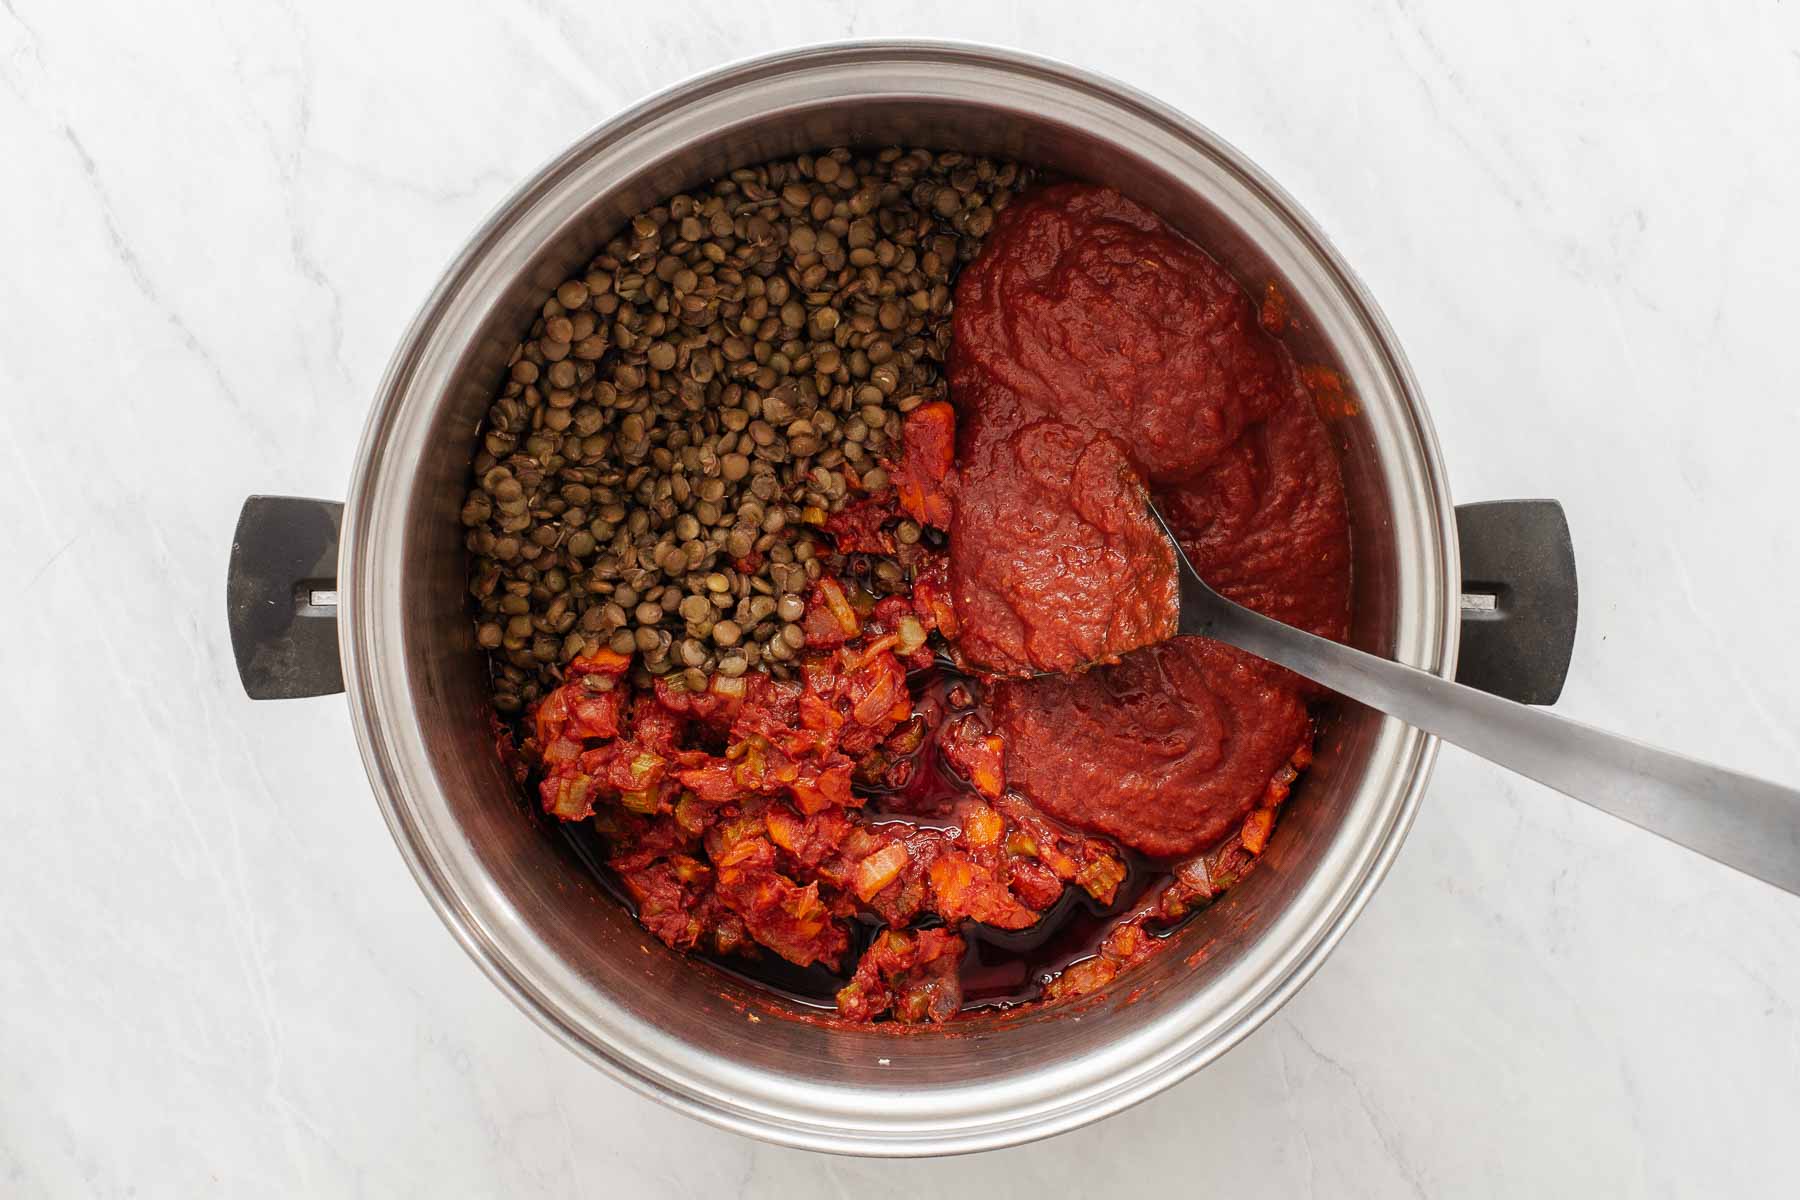 Adding tomato products to a pan with lentils in it.